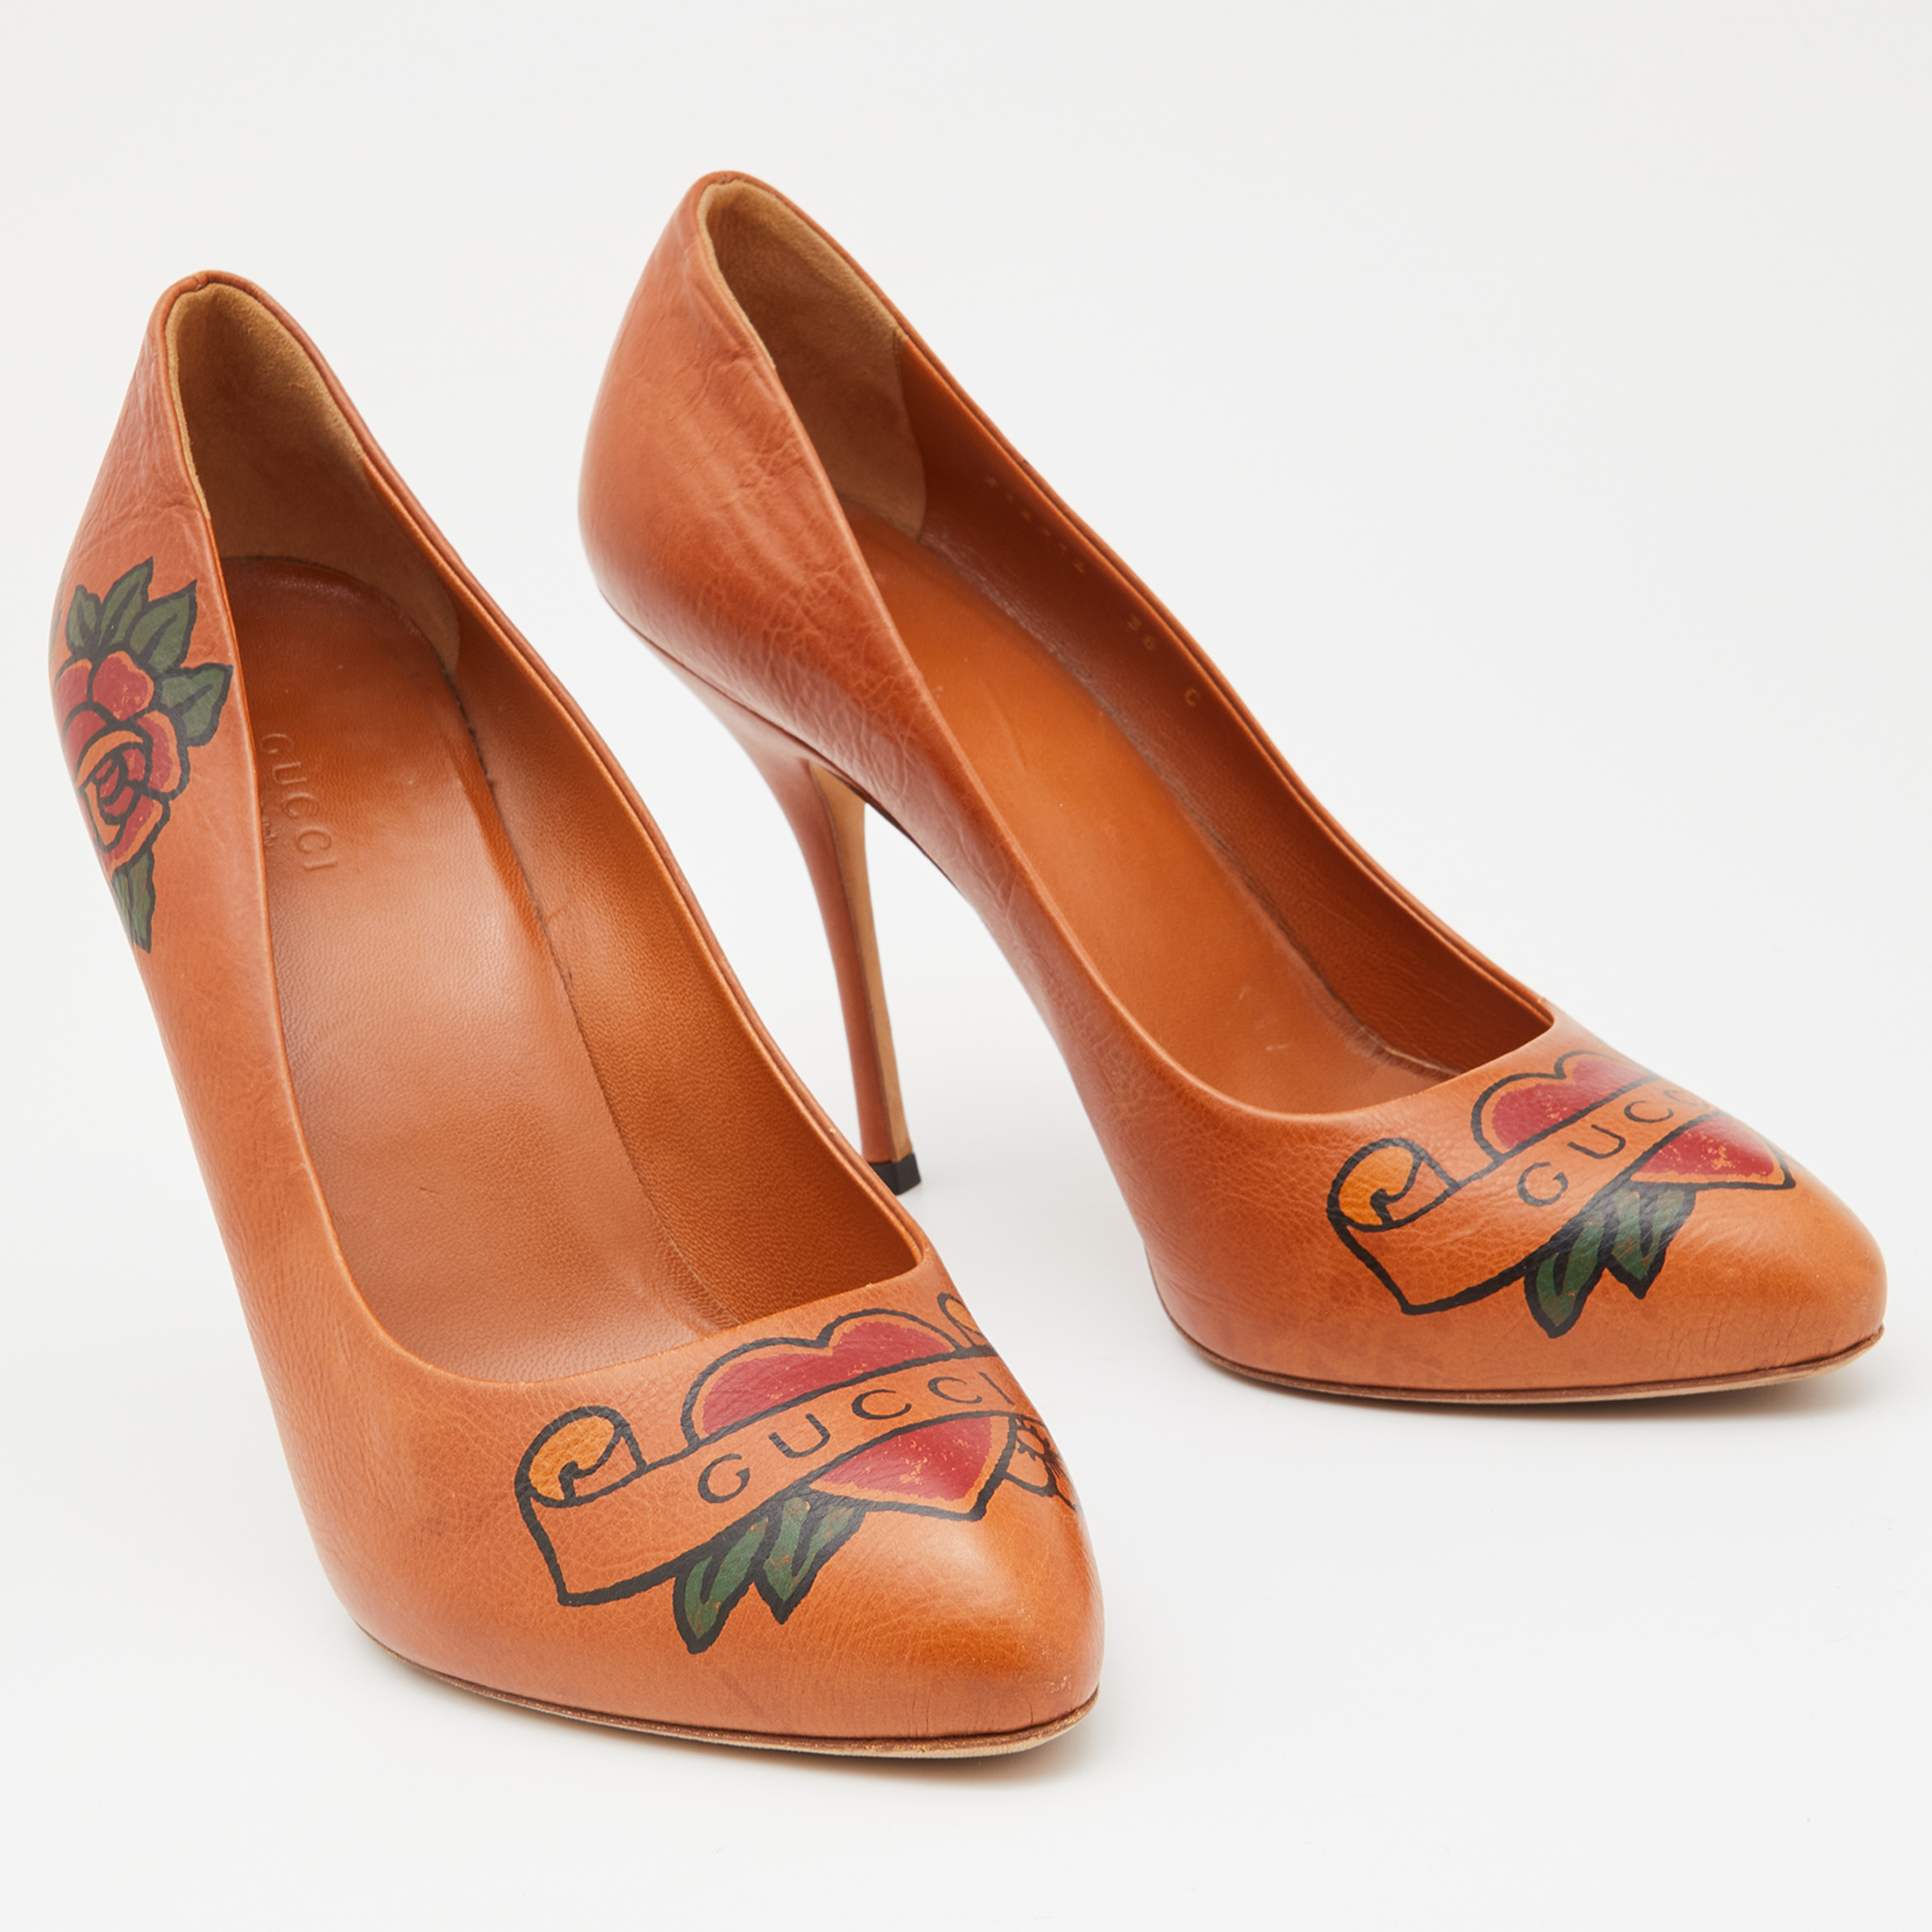 Gucci Tan Printed Leather Pumps Size 38